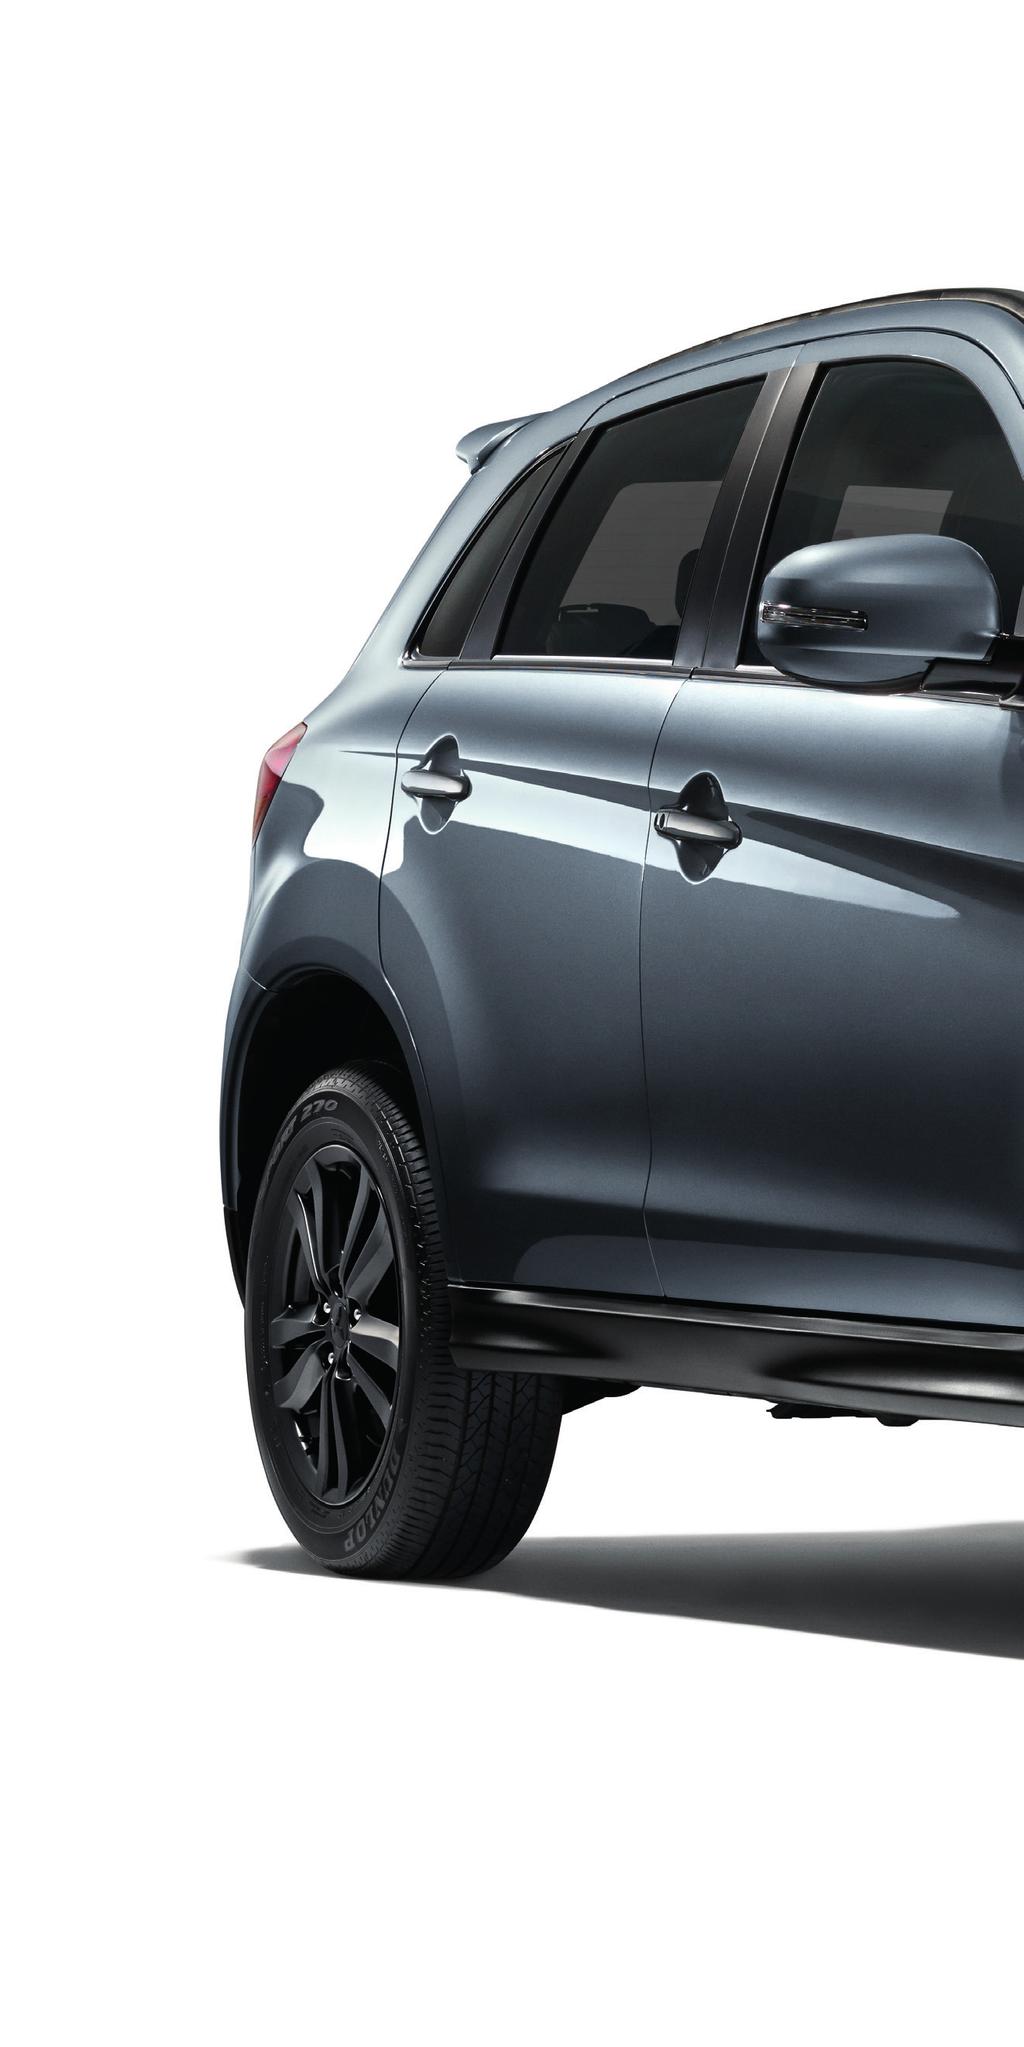 NEWS Mitsubishi ASX Designer Edition Designer touch for the award-winning SUV T 8 he award-winning Mitsubishi ASX is also now a bold fashion statement with the recent introduction of the Mitsubishi